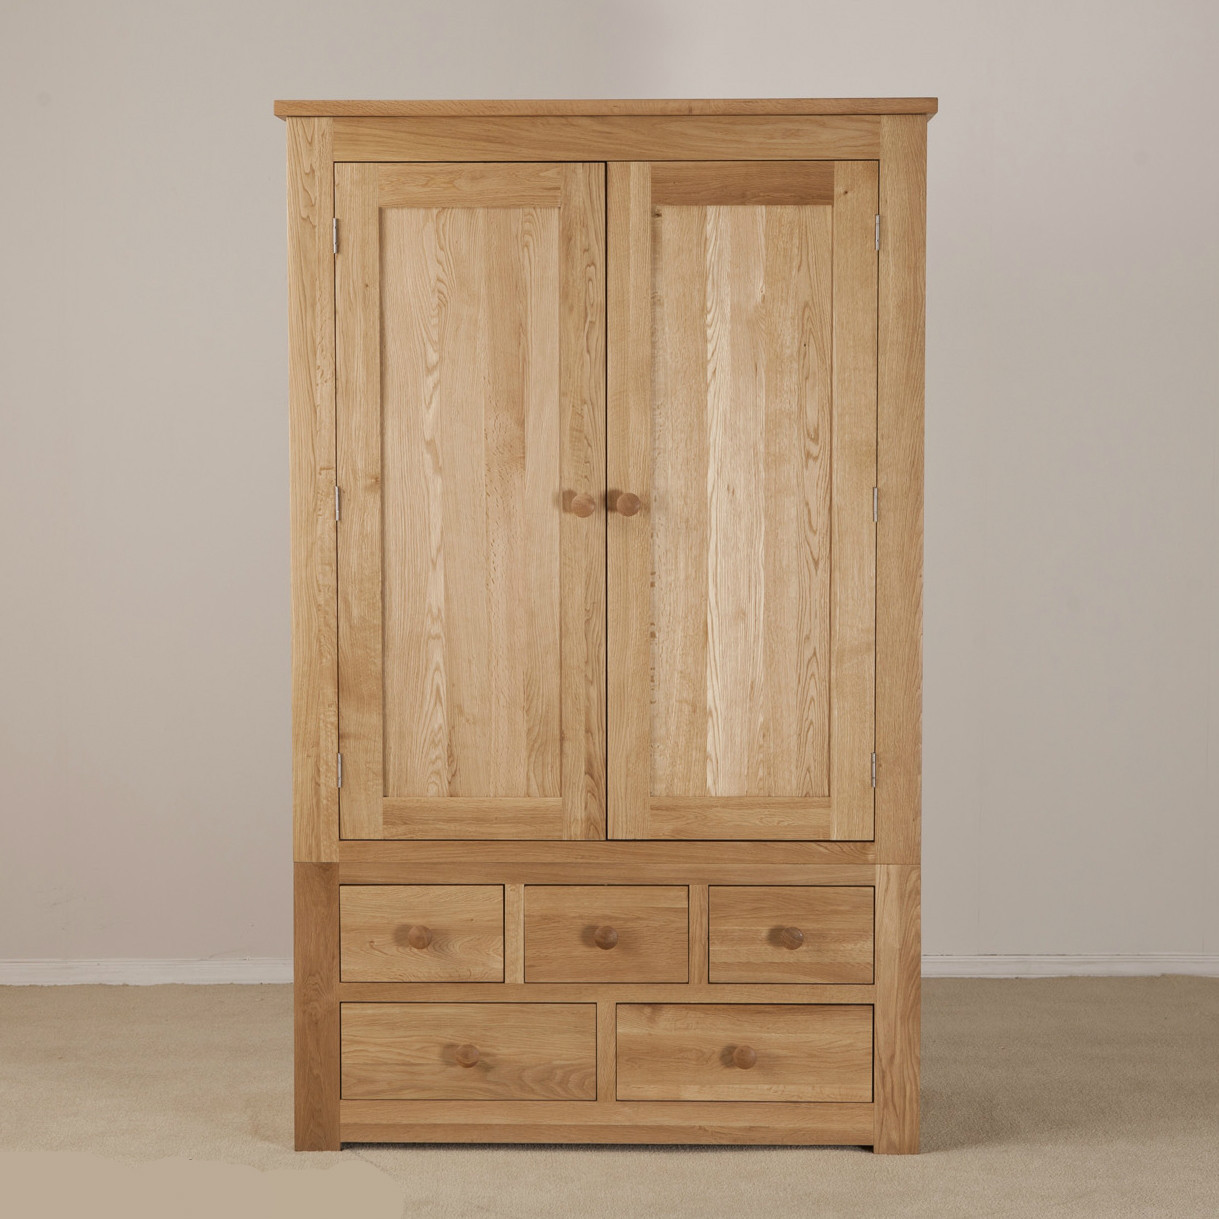 Cool Clifton Oak Wardrobe With Drawers from Quarter Furniture - 1 wooden wardrobe with drawers